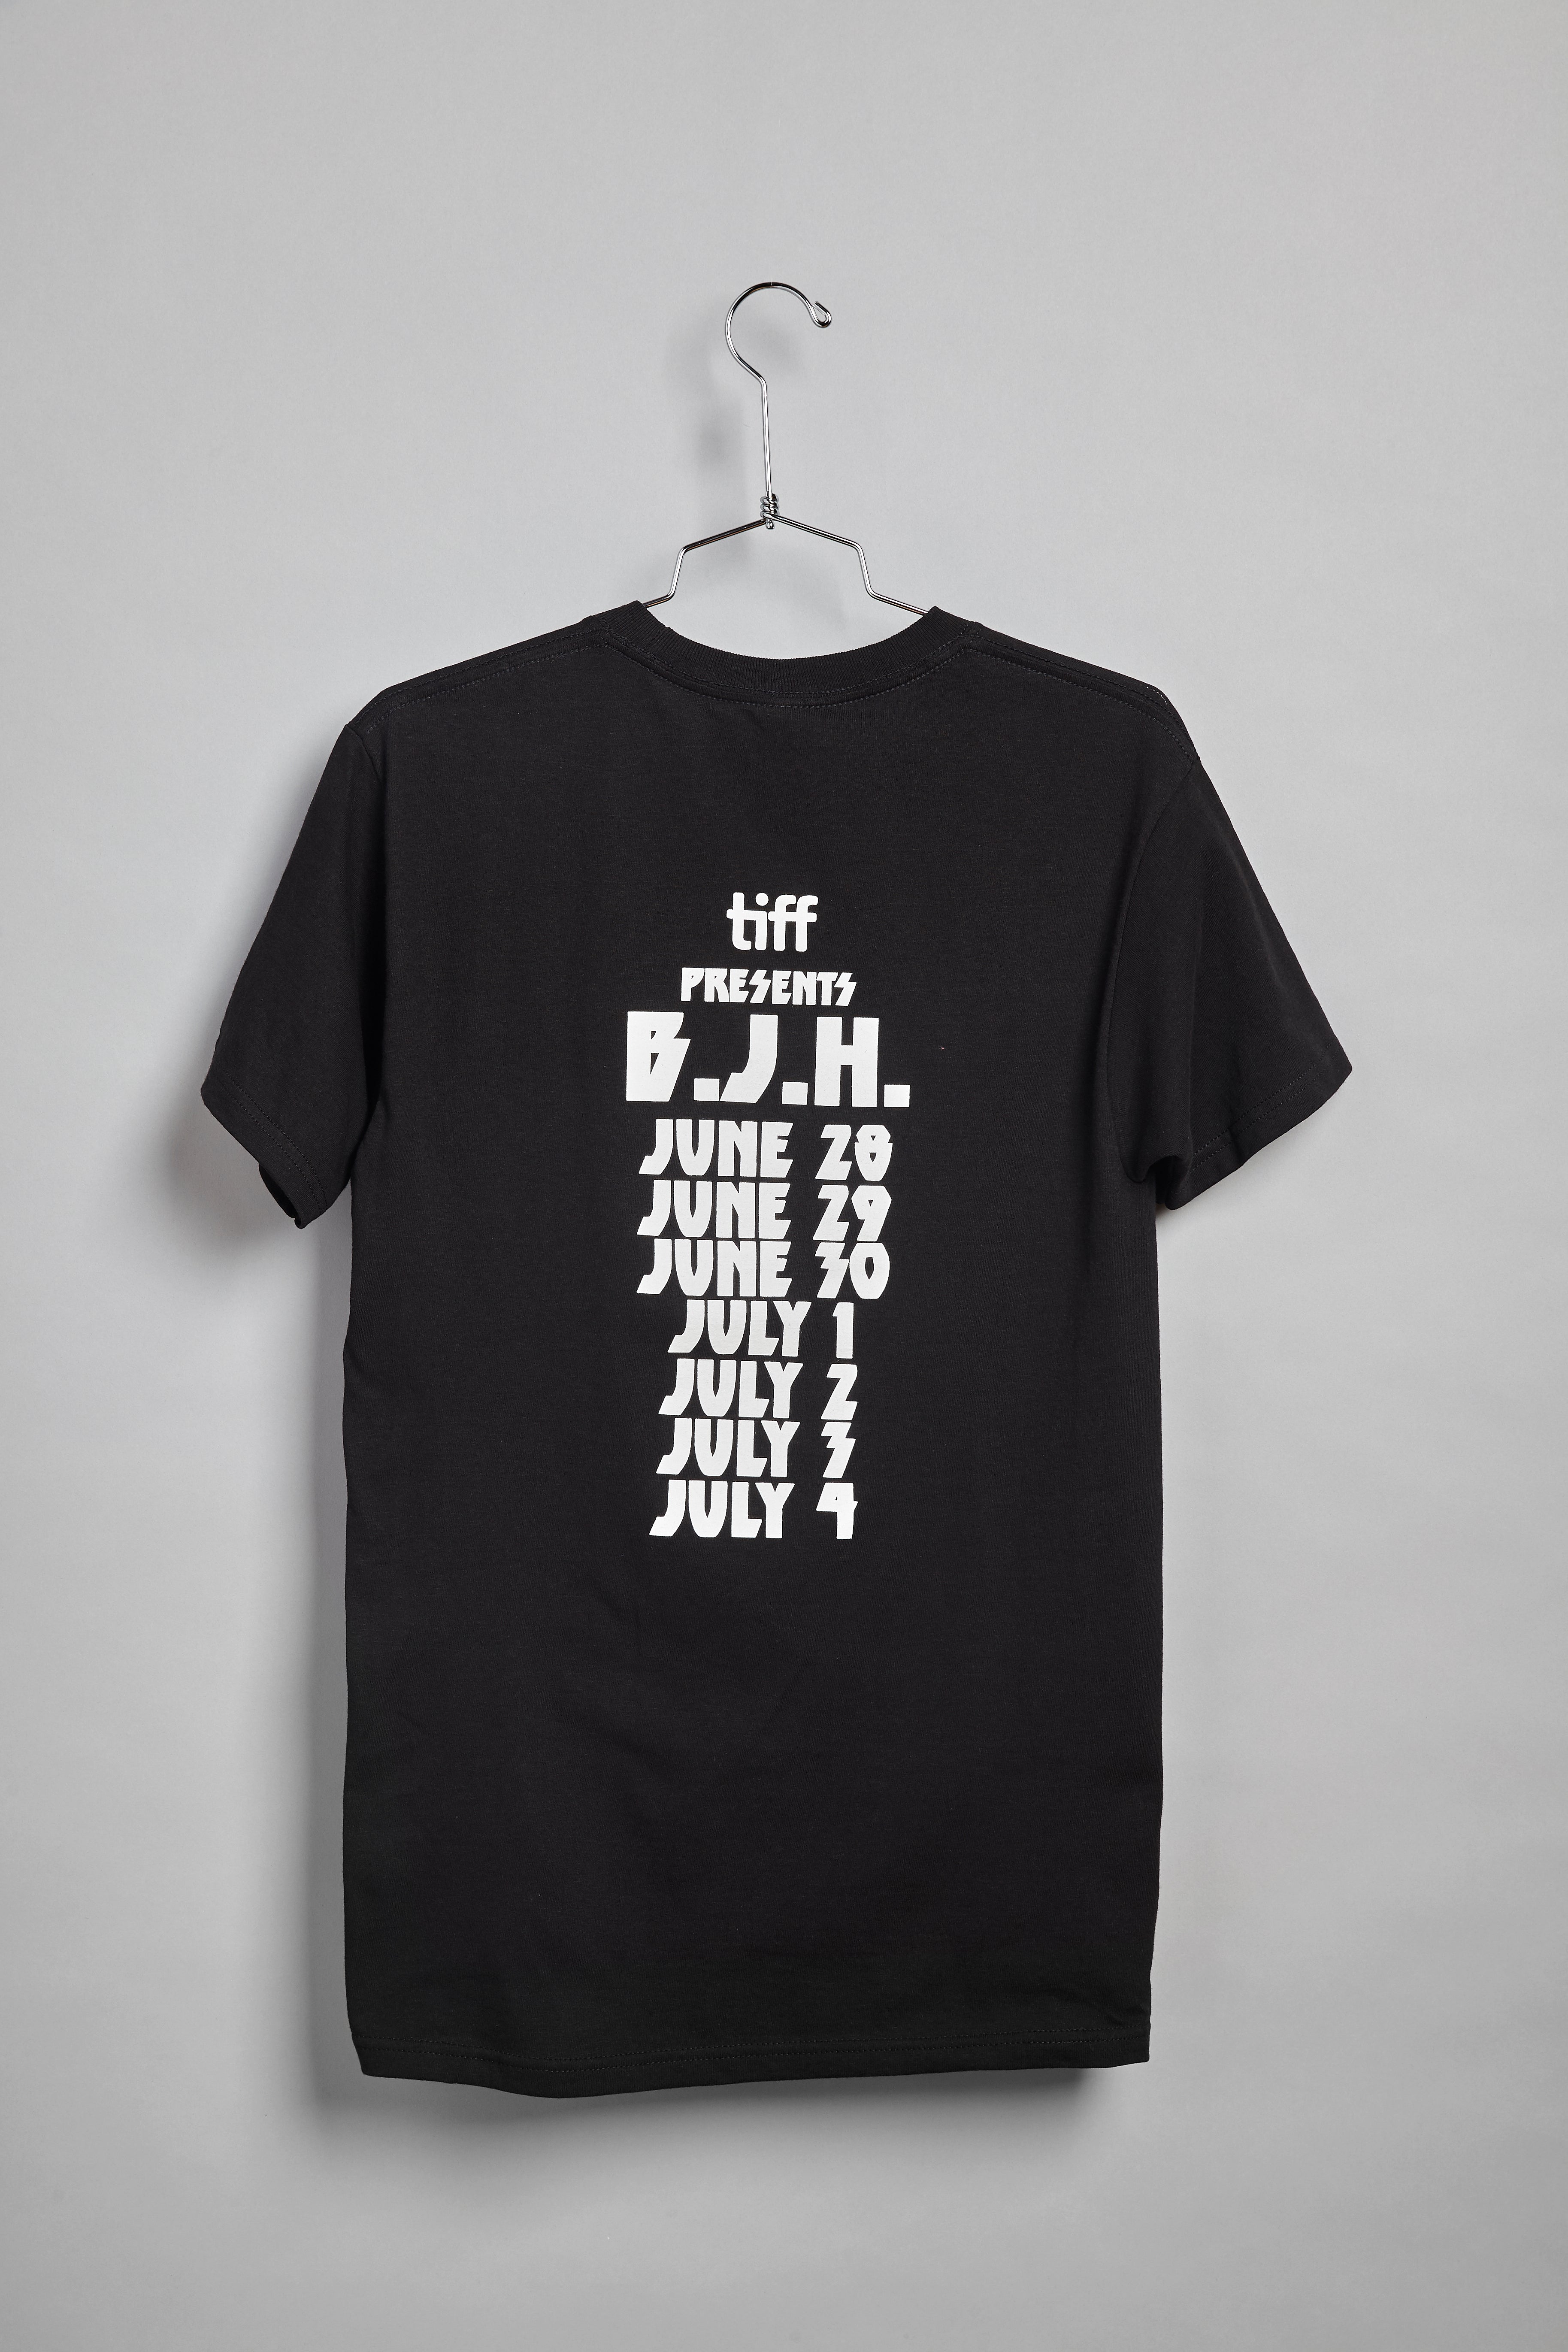 Black T-Shirt with a white "Heavy Metal" style type face on the back. Mimicking dates that are usually written on the back of a concert tour T-Shirt. It reads, "tiff presents B.J.H. June 20, June 29, June 30, July 1, July 2, July 4"